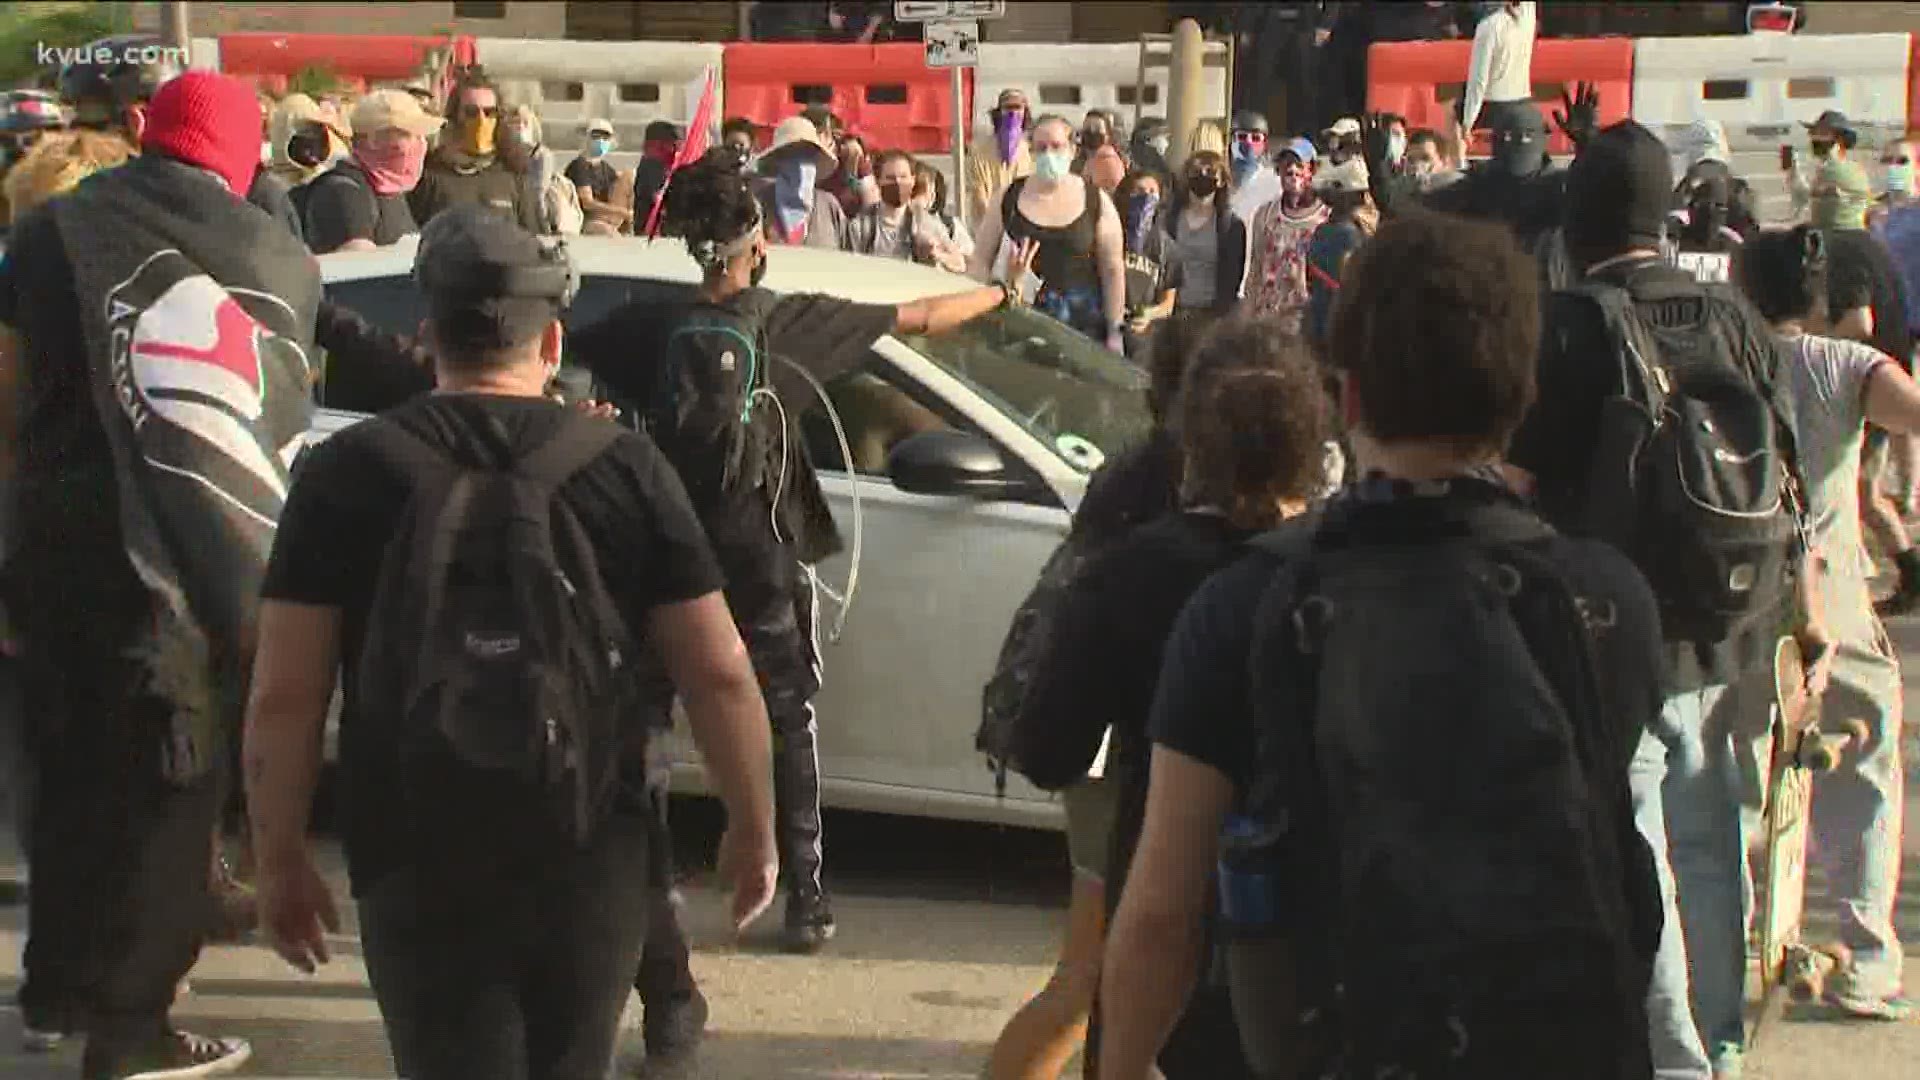 Protests calling for racial equality got a little tense after a driver pulled up in a car and possibly pointed what appeared to be a gun at the crowd.